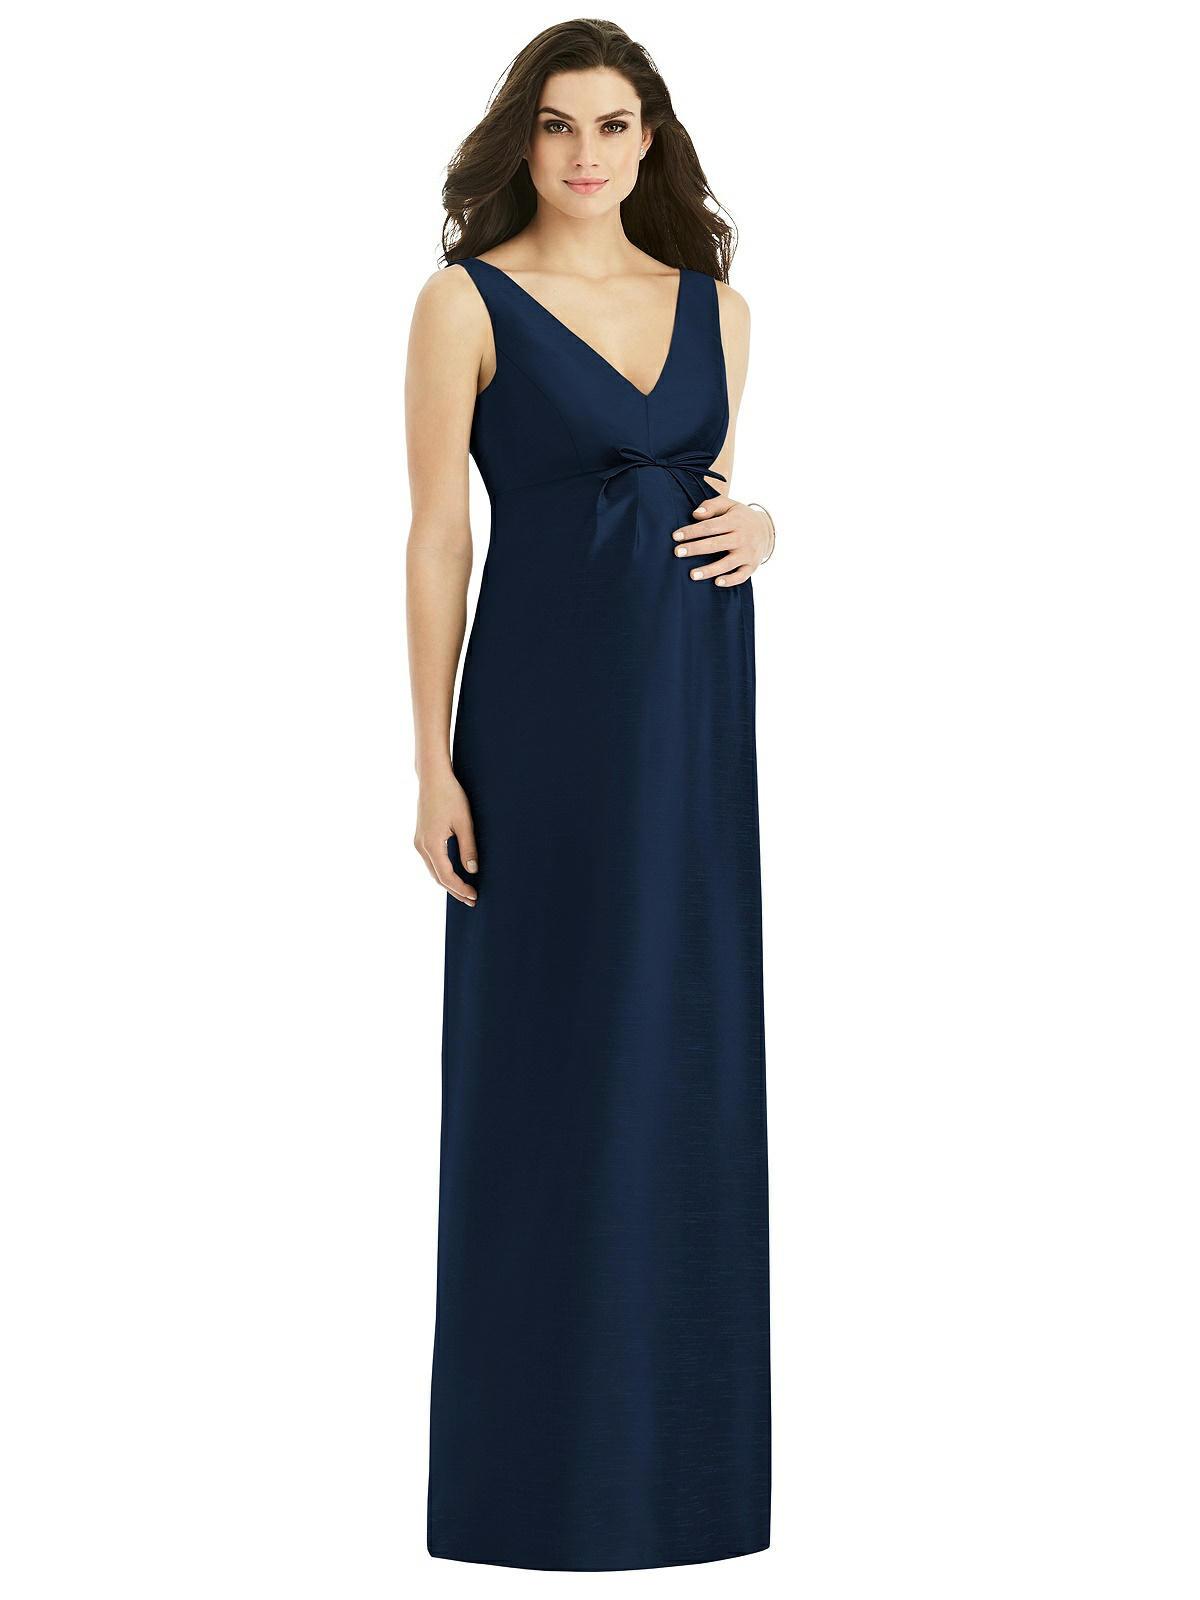 22 Maternity Bridesmaid Dresses For Expectant Bridesmaids 